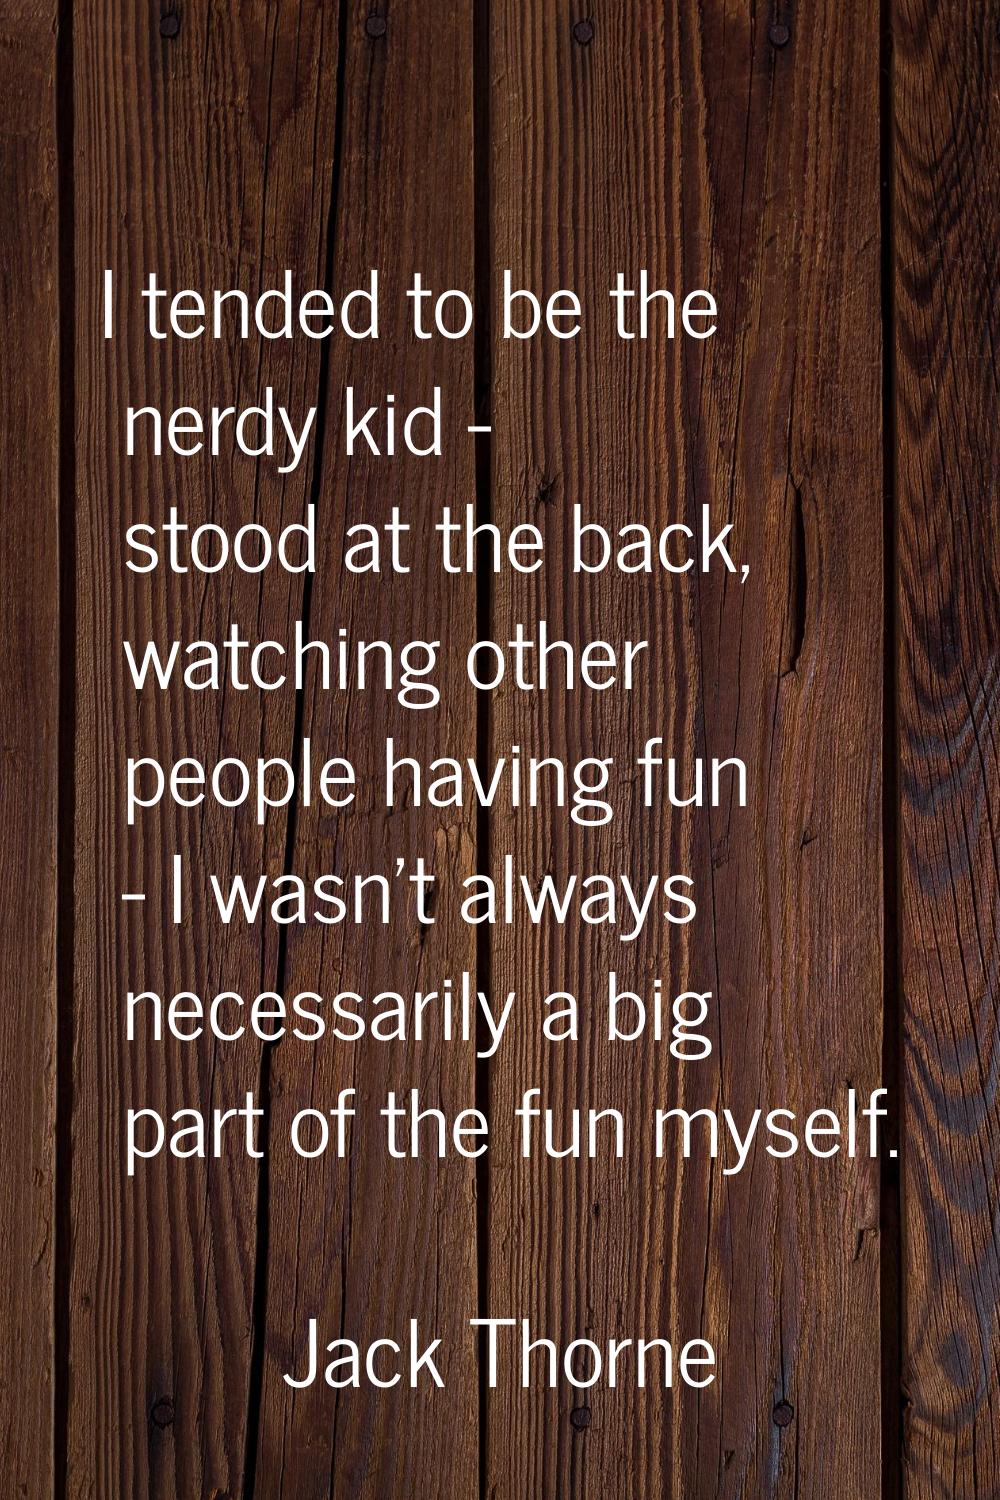 I tended to be the nerdy kid - stood at the back, watching other people having fun - I wasn't alway